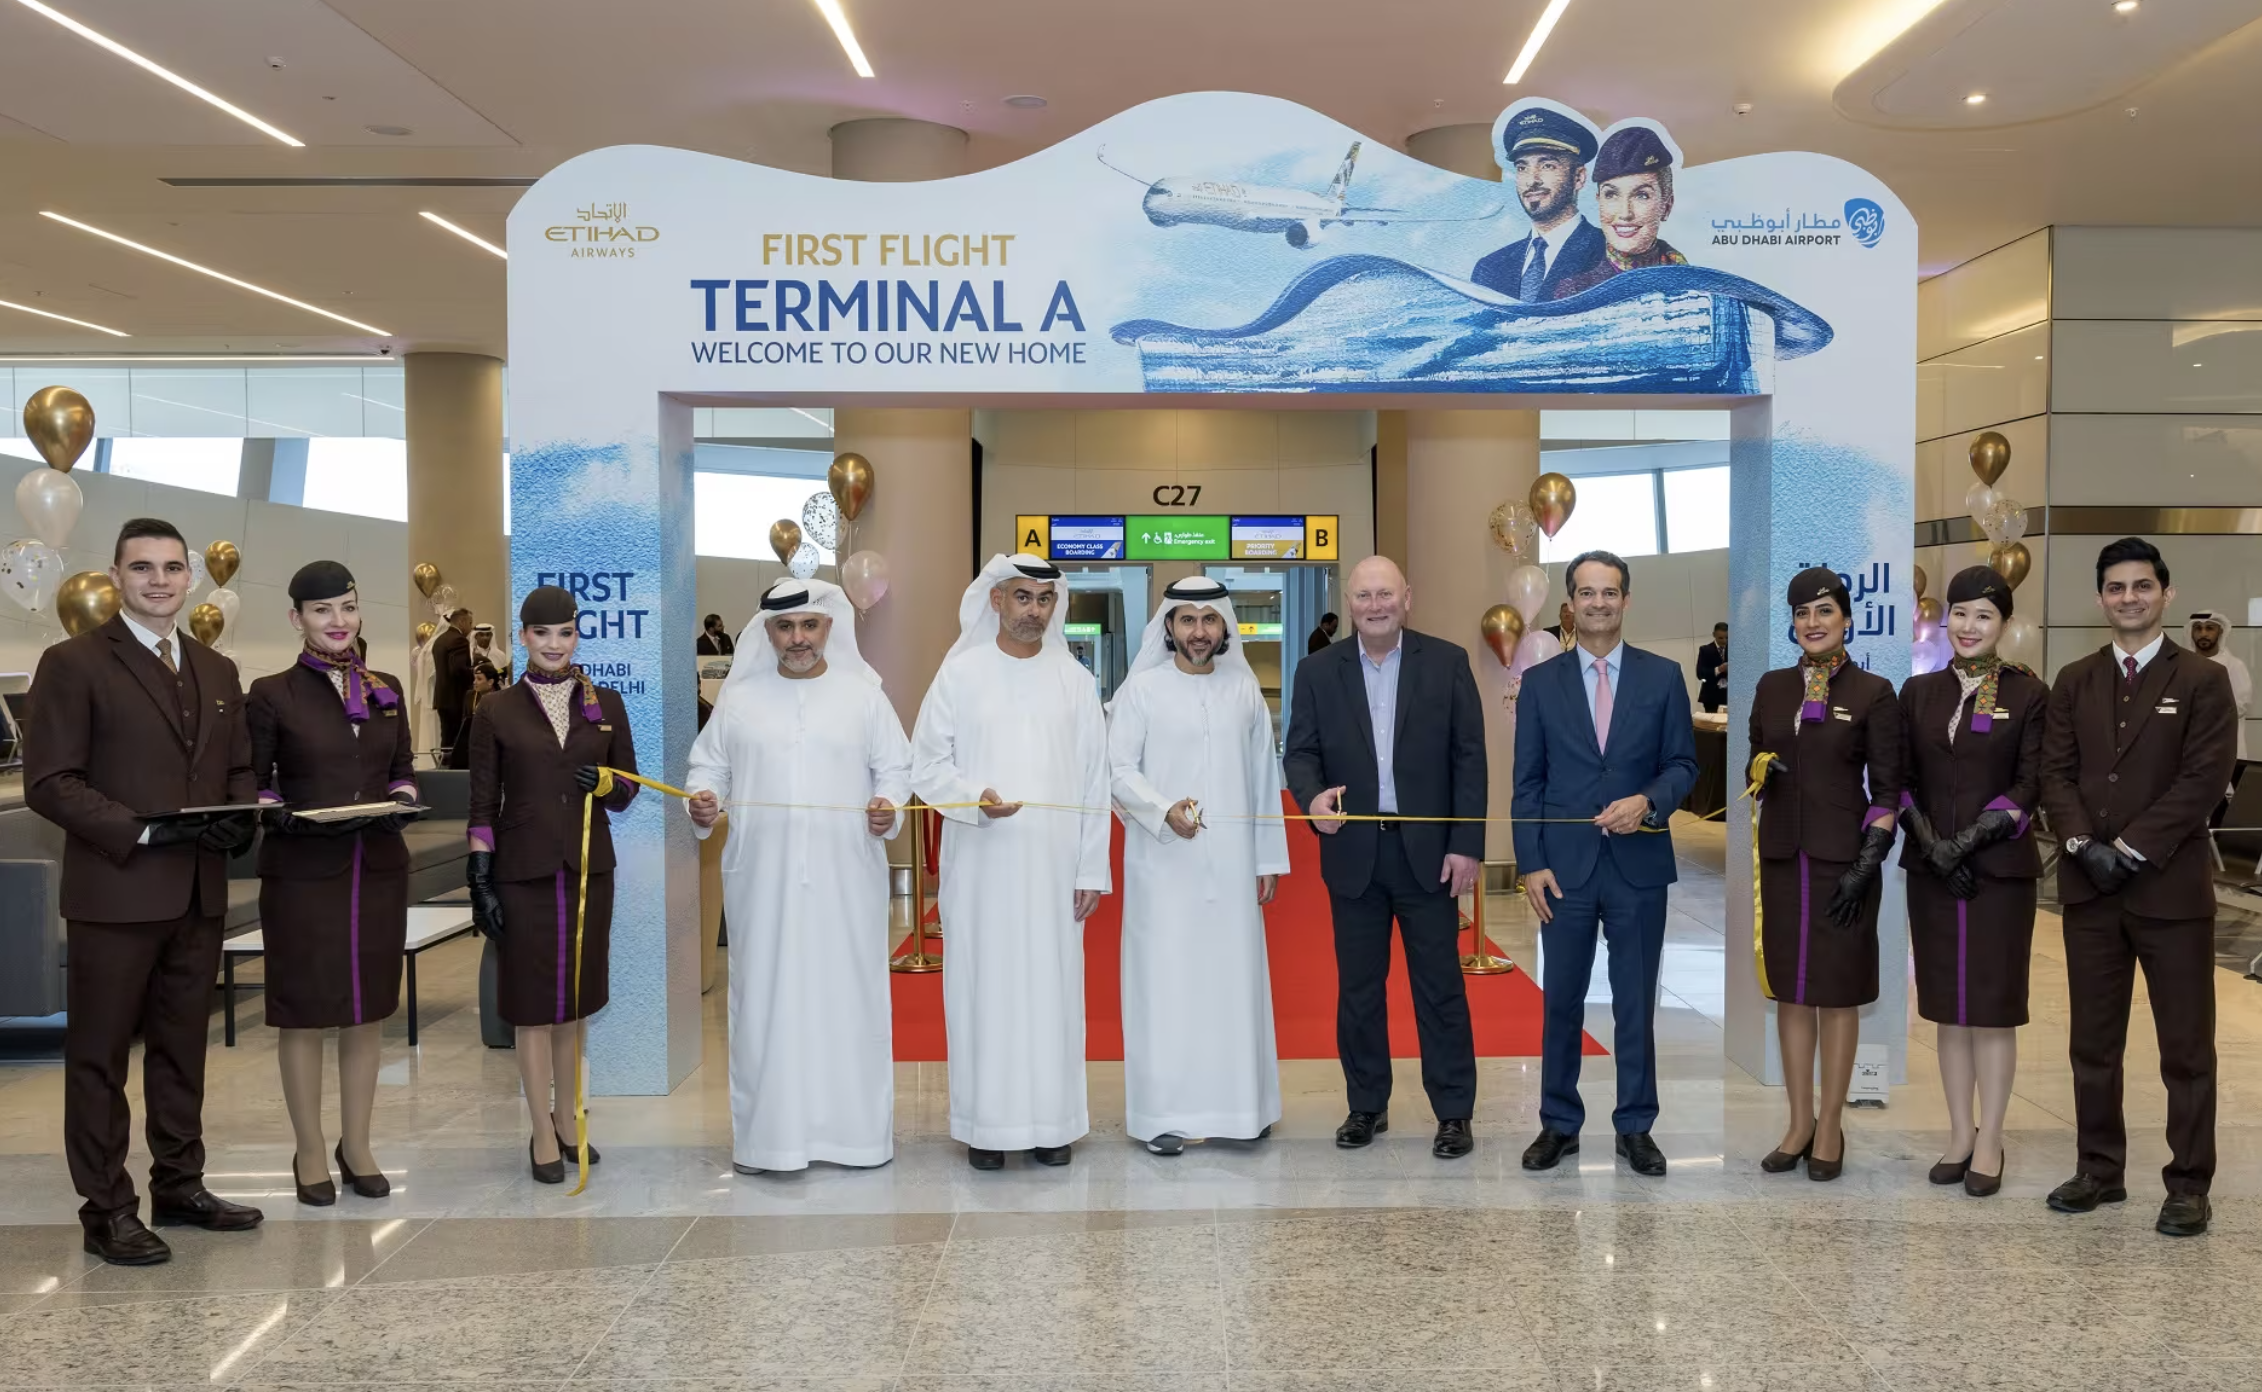 The opening of Abu Dhabi International Airport's (AHU) new Terminal A